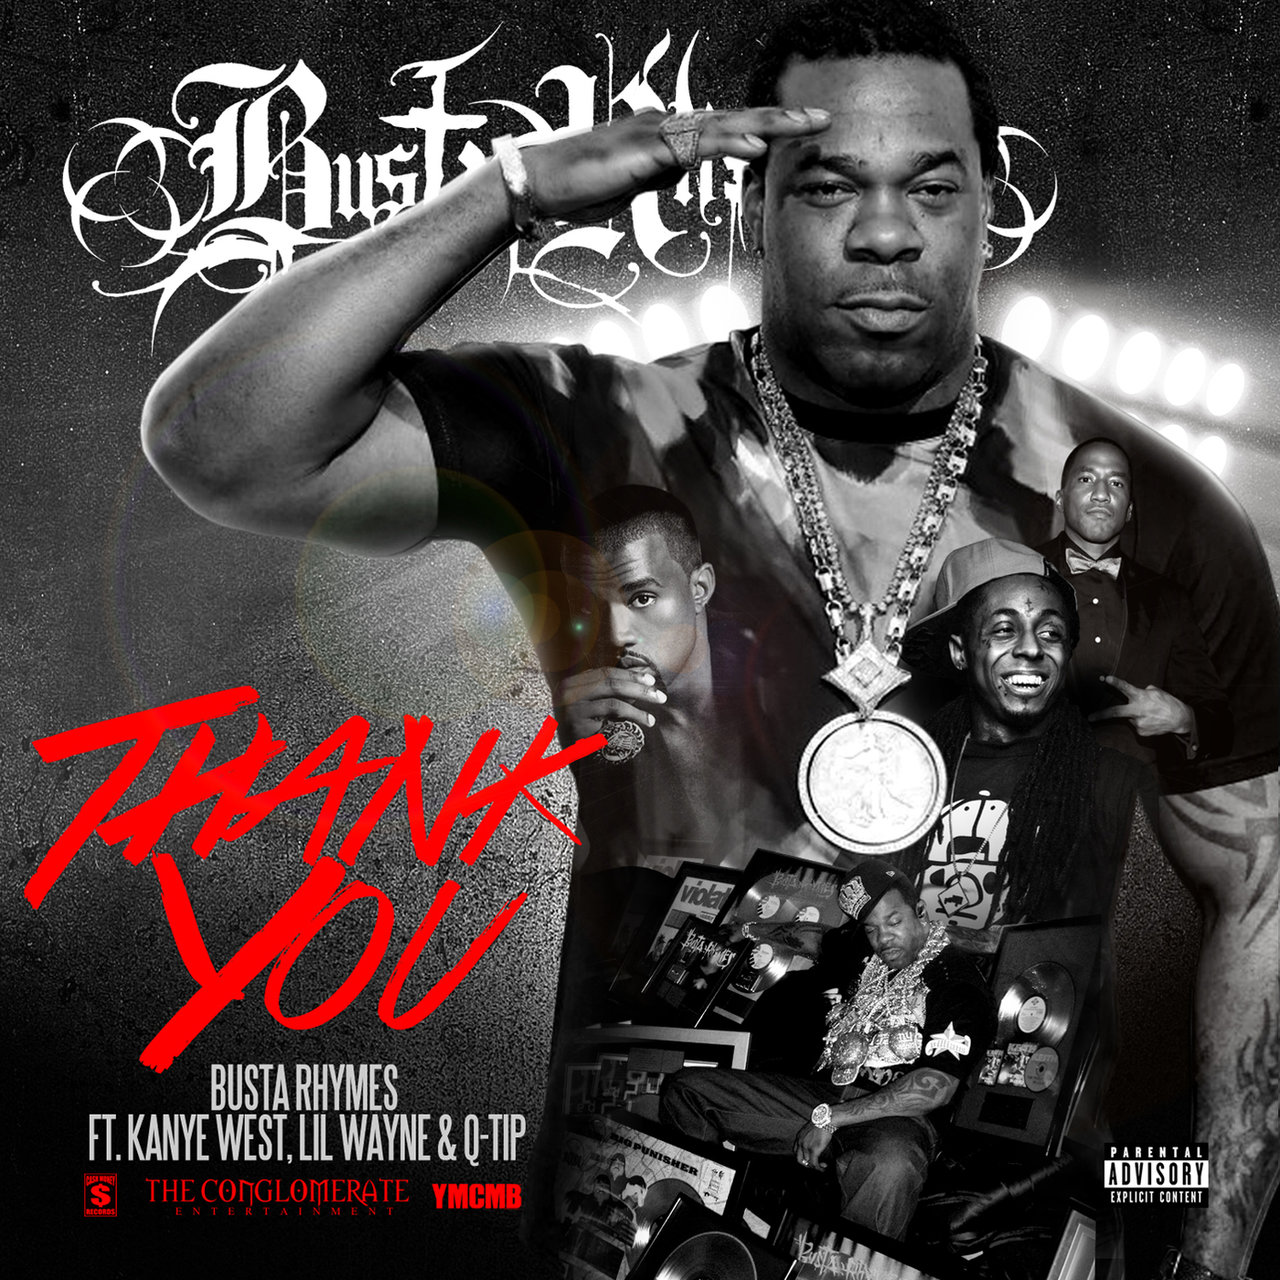 Busta Rhymes - Thank You (ft. Kanye West, Lil Wayne and Q-Tip) (Cover)